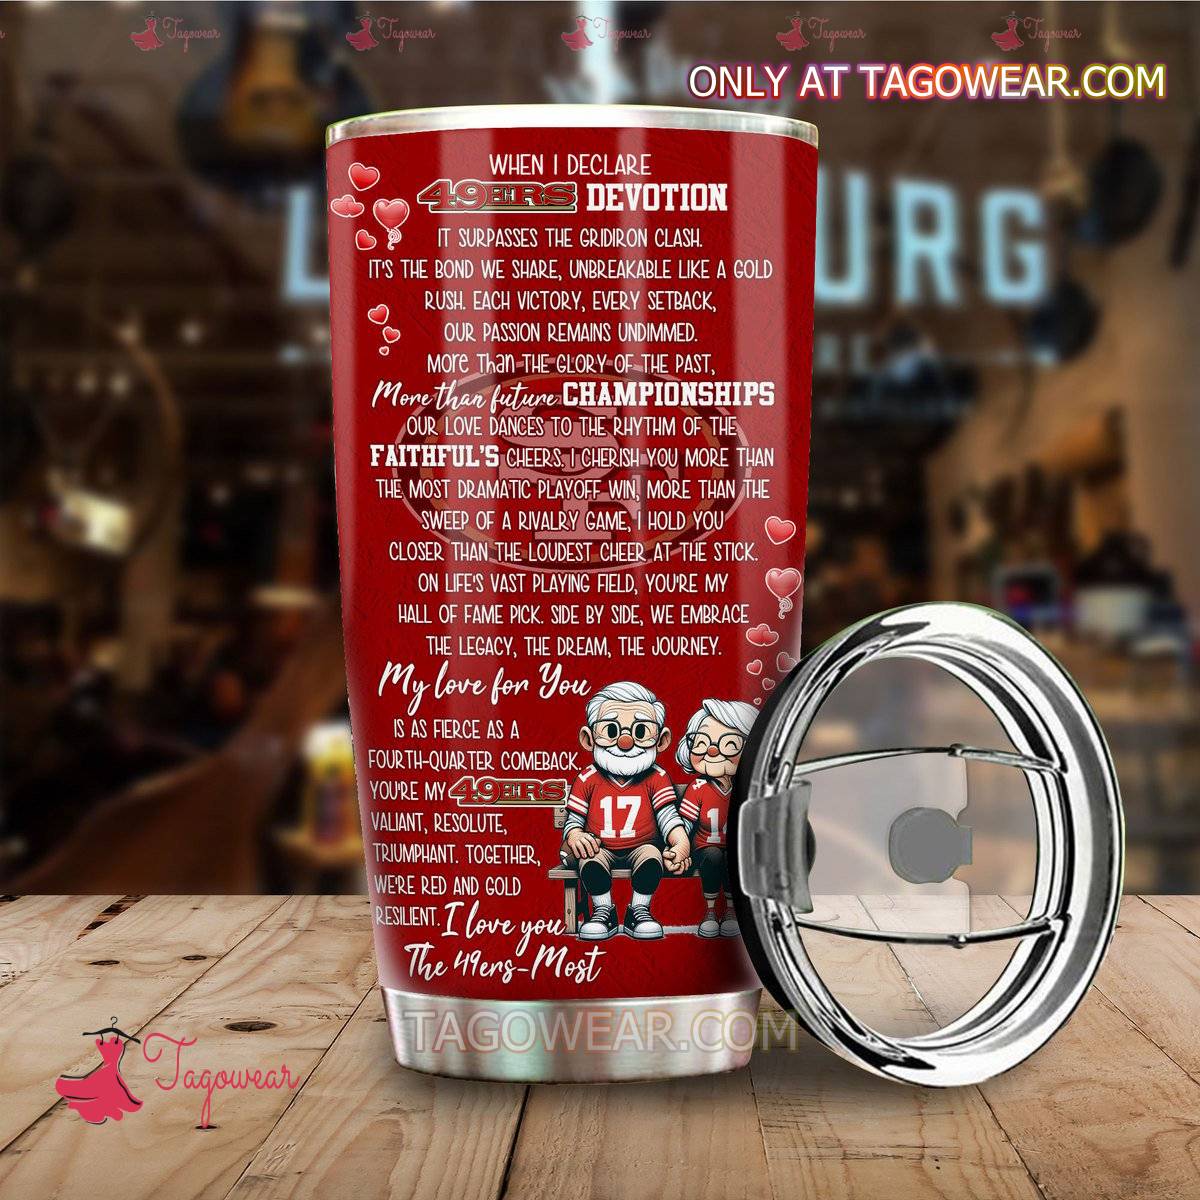 San Francisco 49ers You And Me We Got This When I Declare 49ers Devotion Personalized Tumbler b